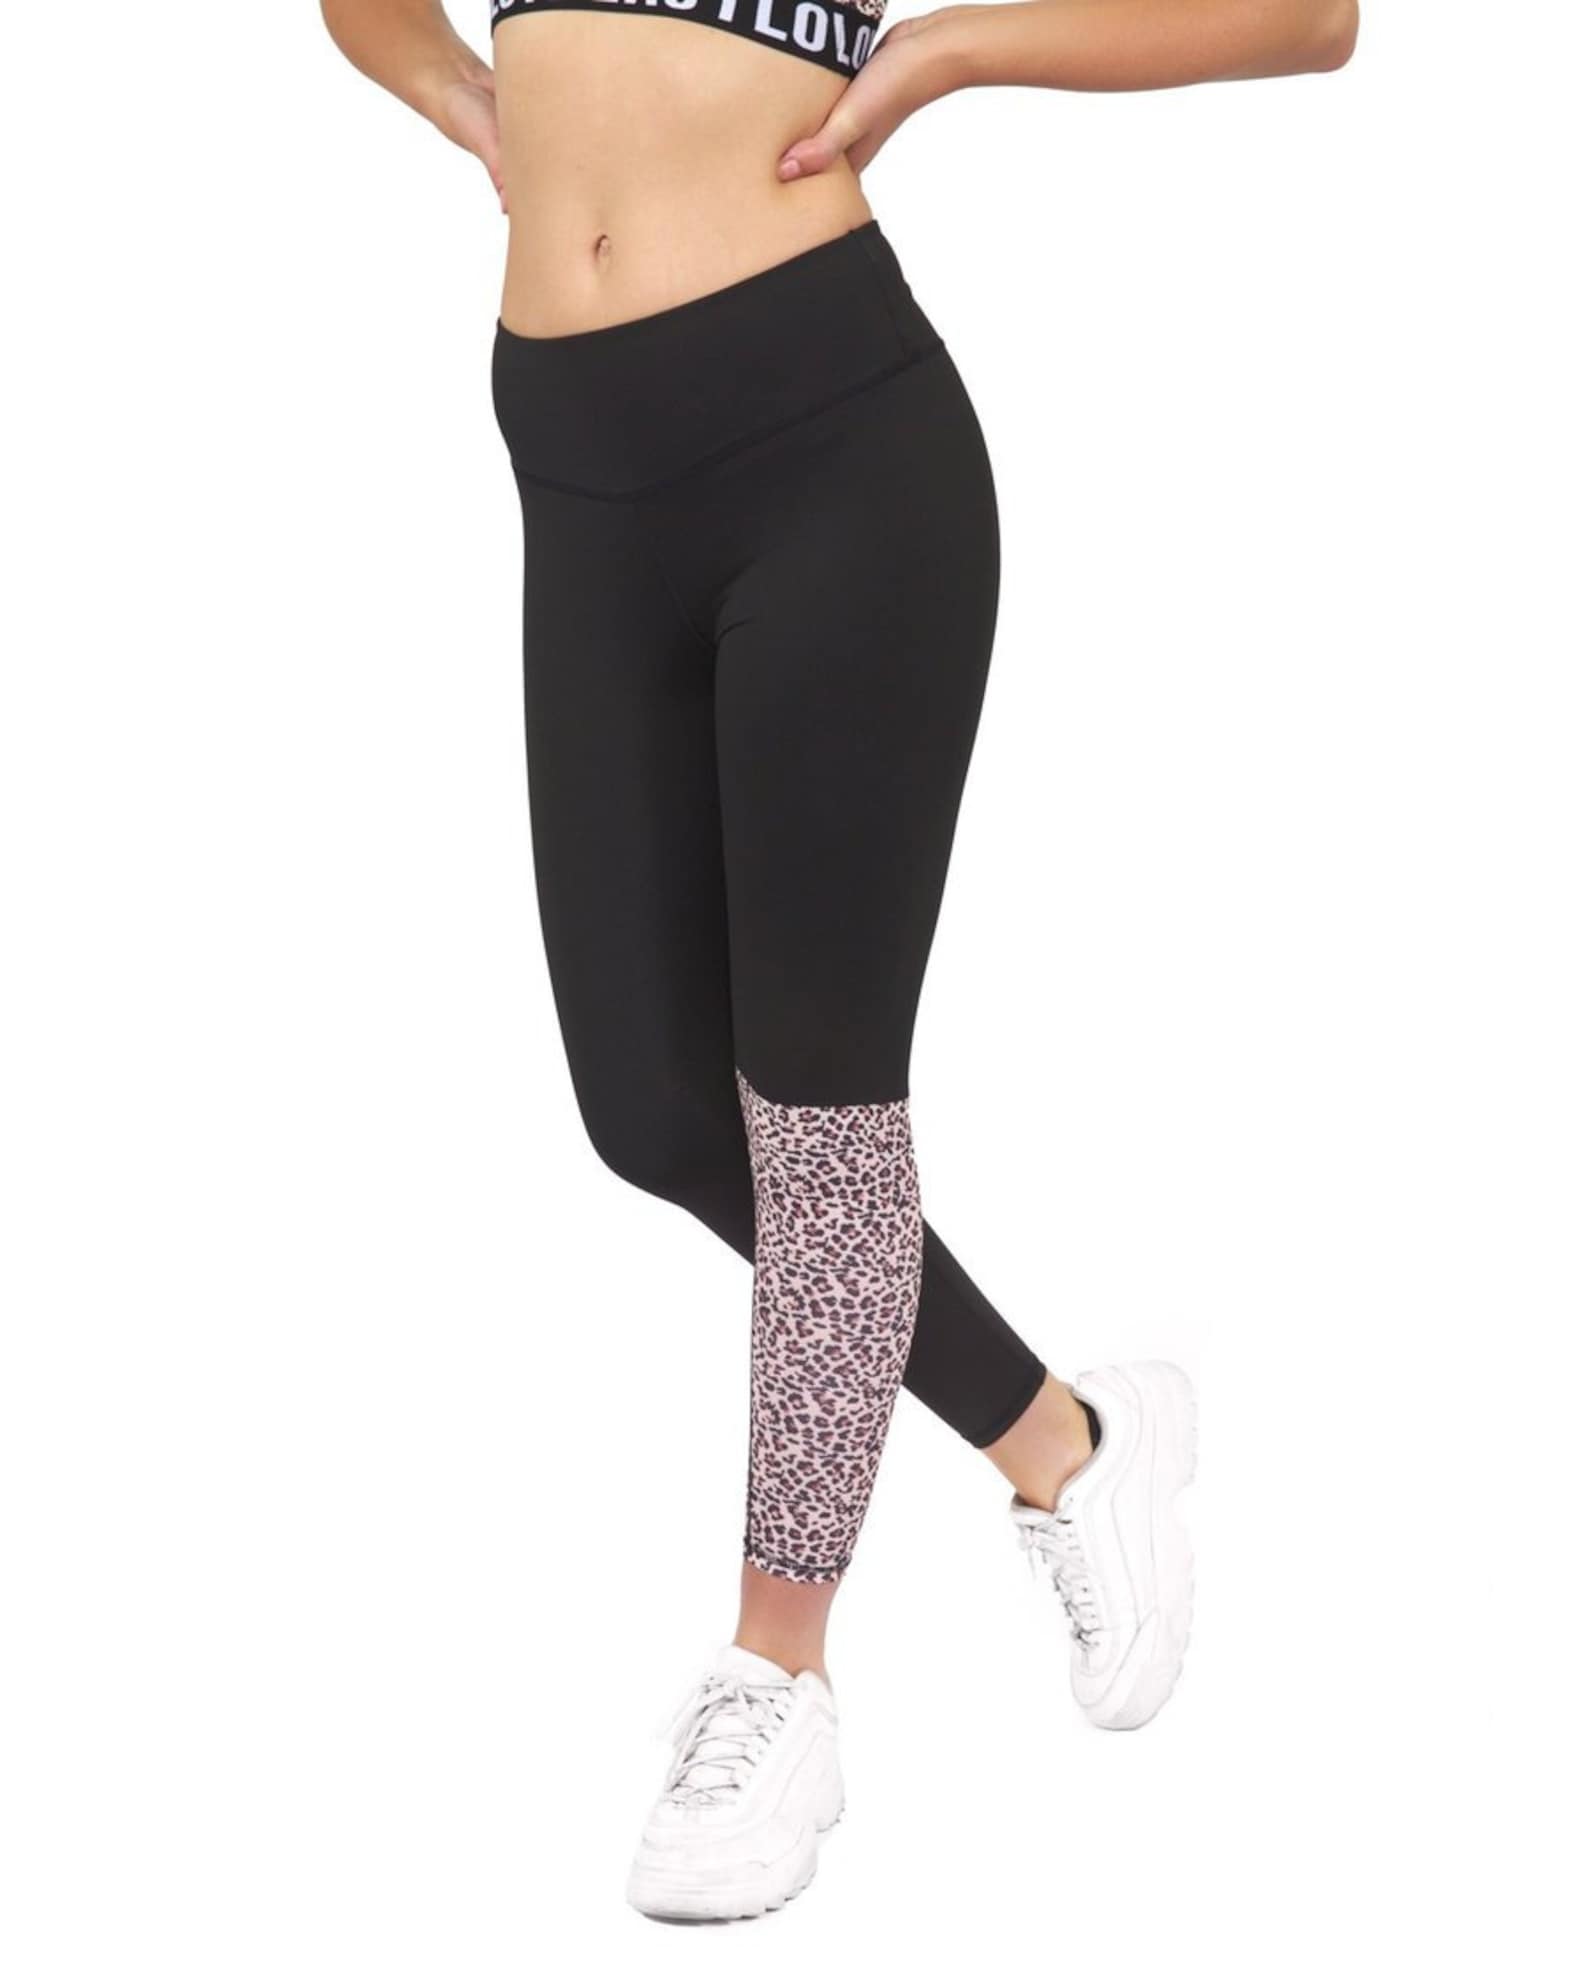 6 Day Leopard Workout Leggings for Fat Body